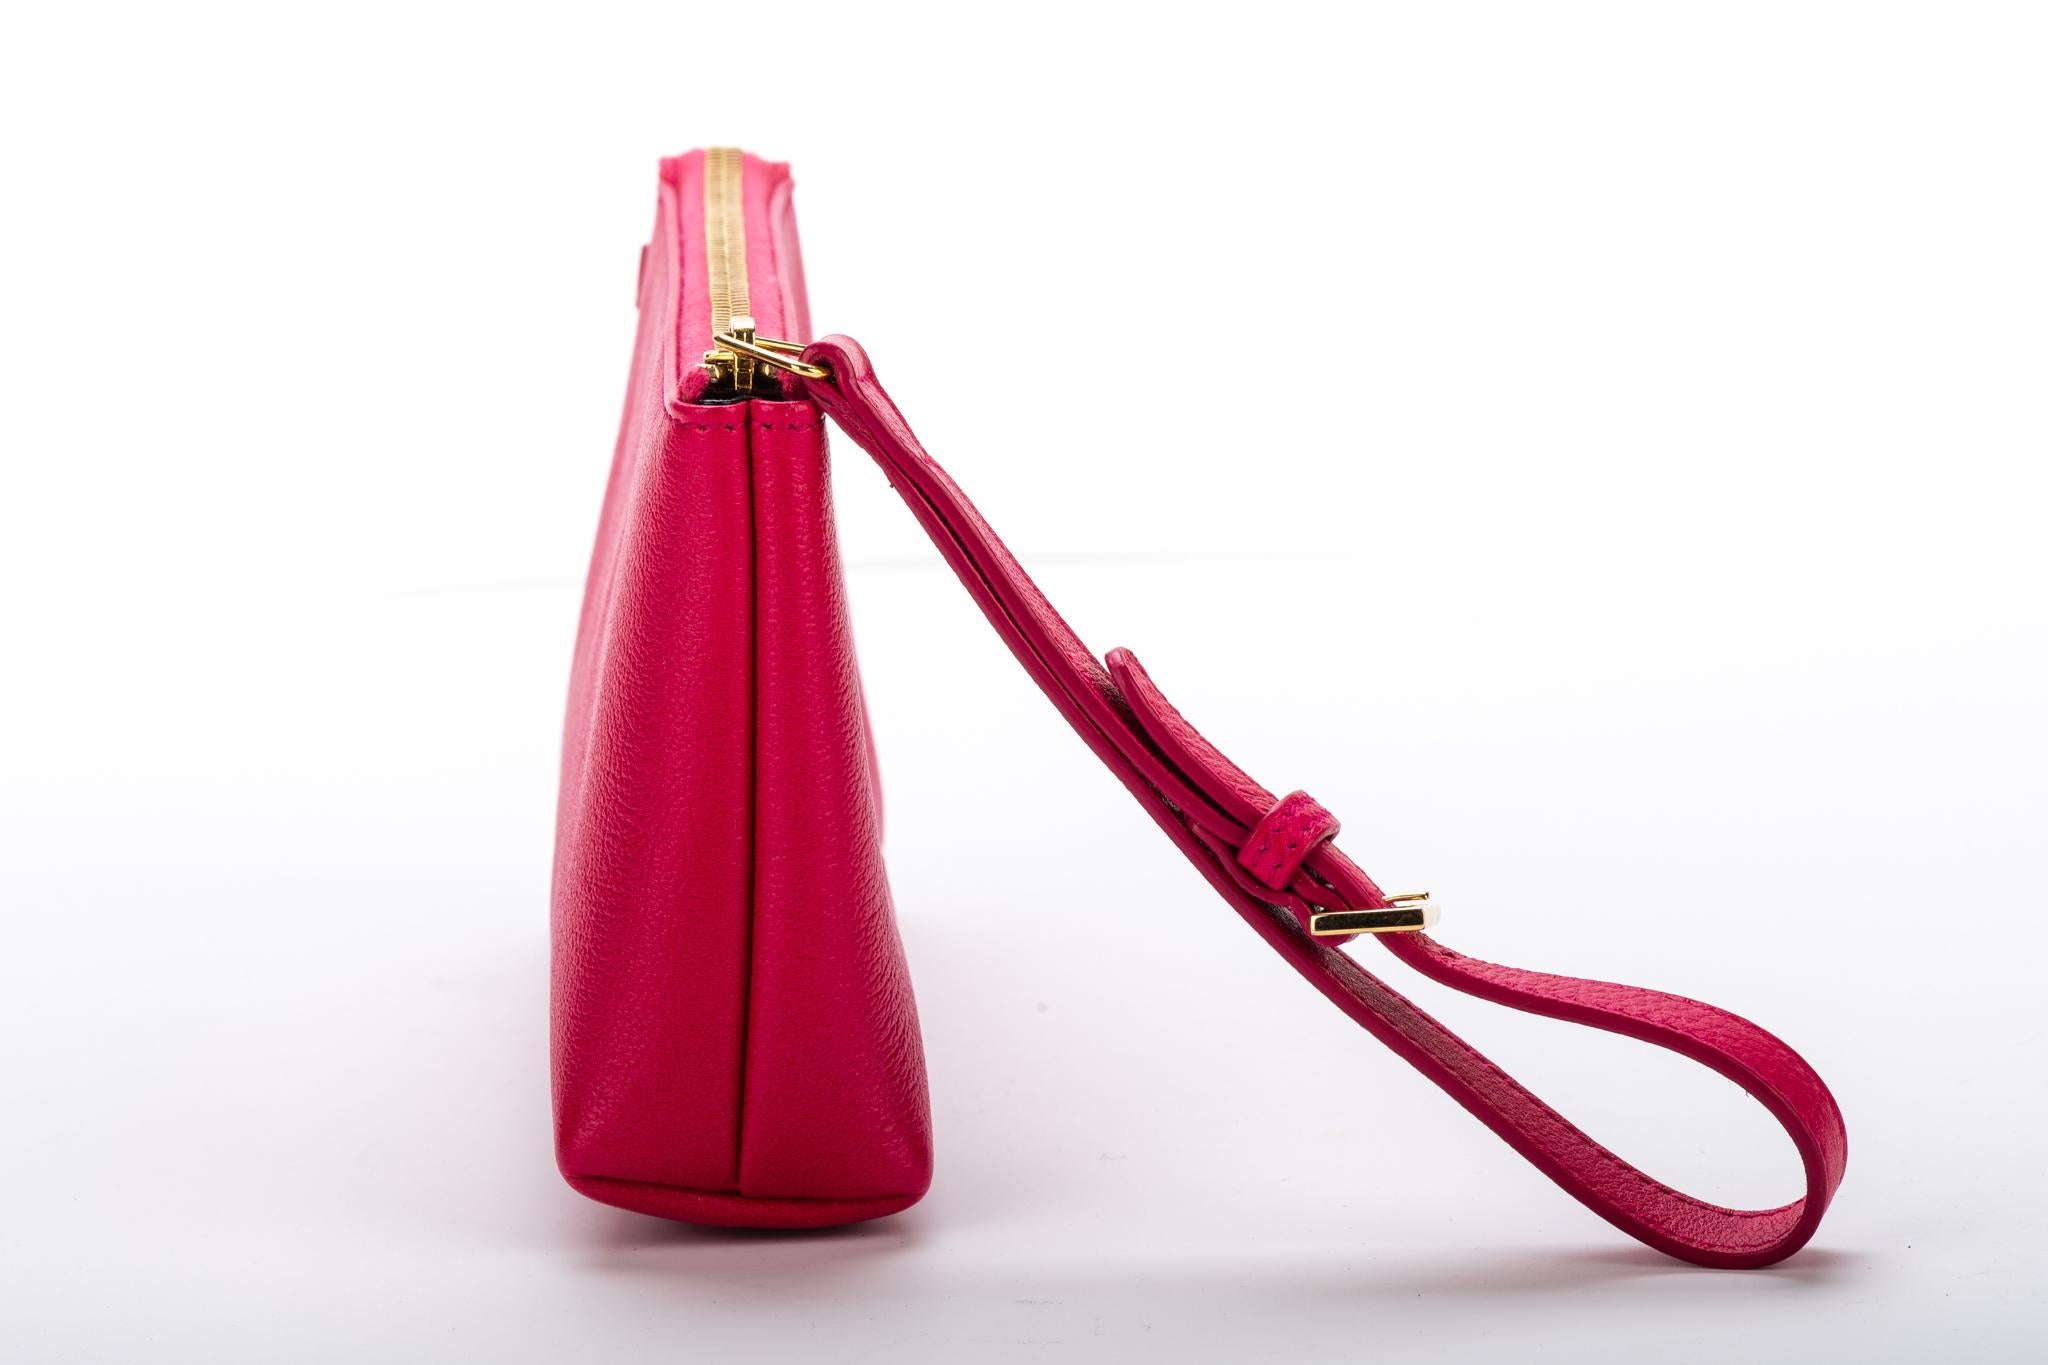 YSL Fuchsia Leather Wristlet Small Bag In Excellent Condition For Sale In West Hollywood, CA